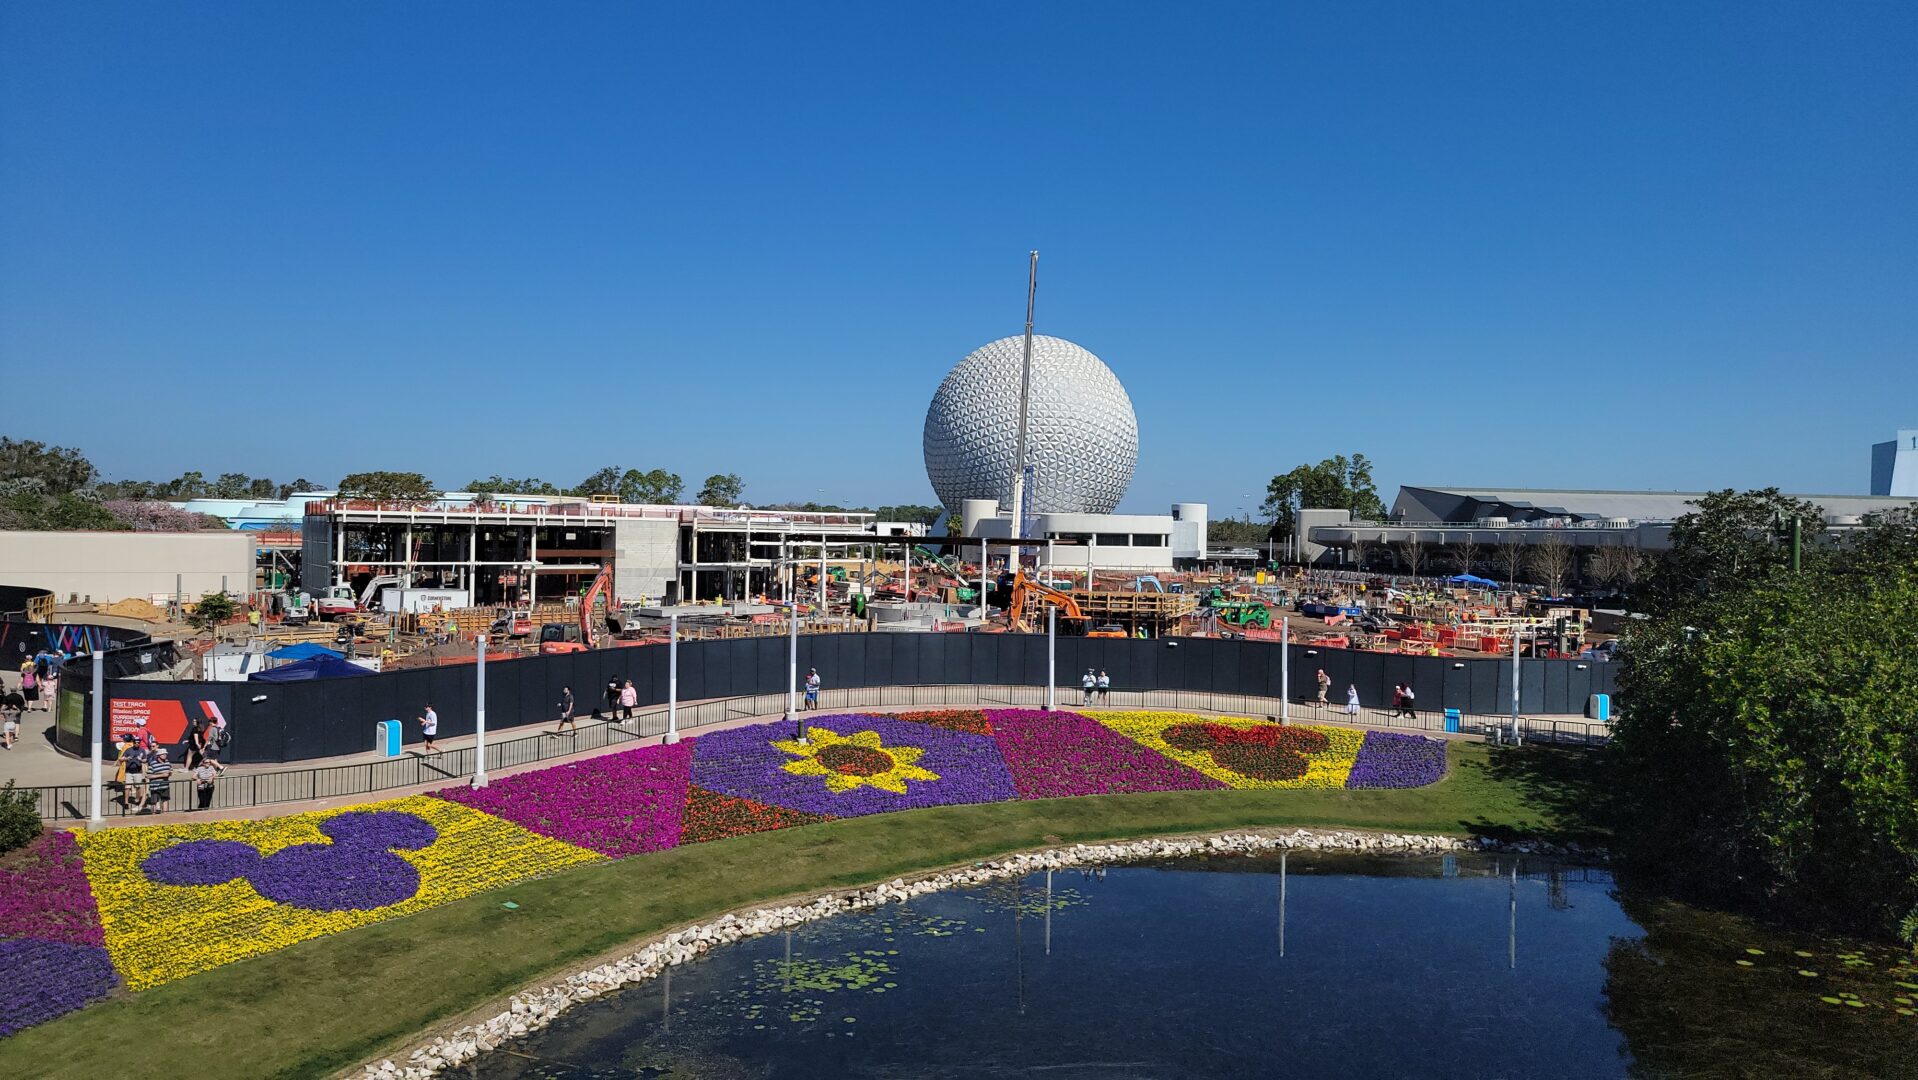 Construction goes Vertical in EPCOT for Communicore Hall